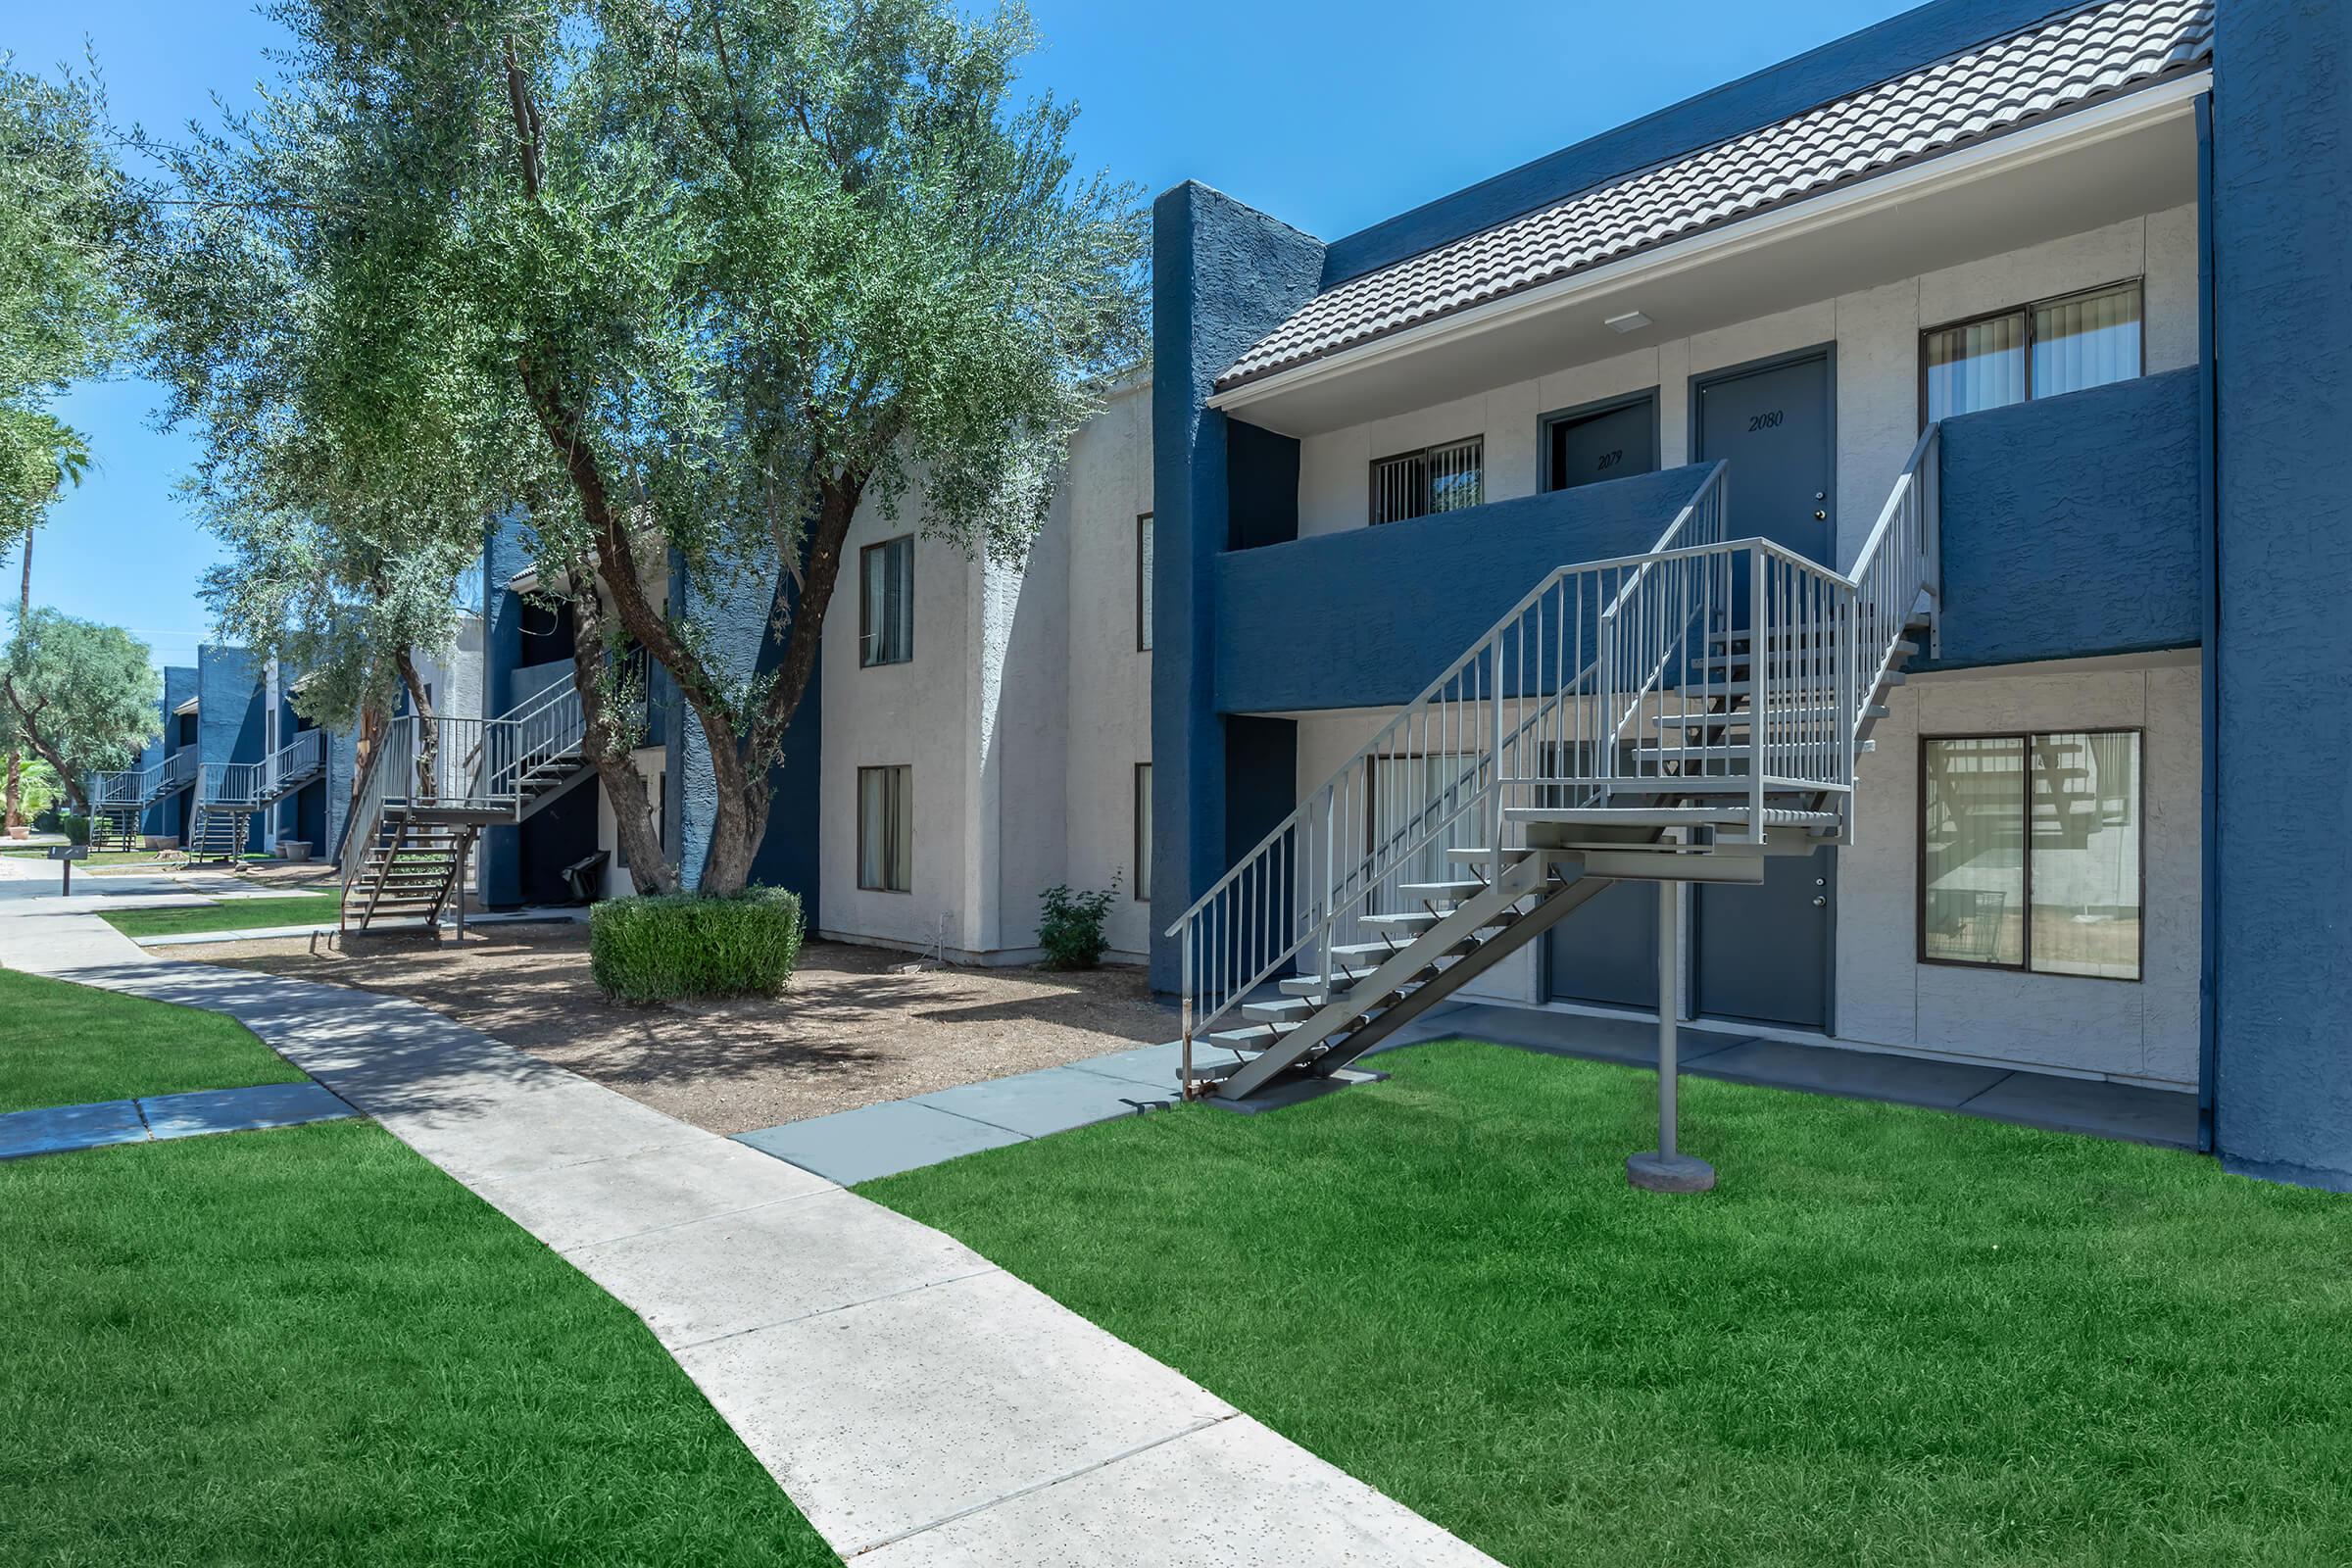 Blue and grey exterior apartment of Rise Camelback next to grass and sidewalk walkway